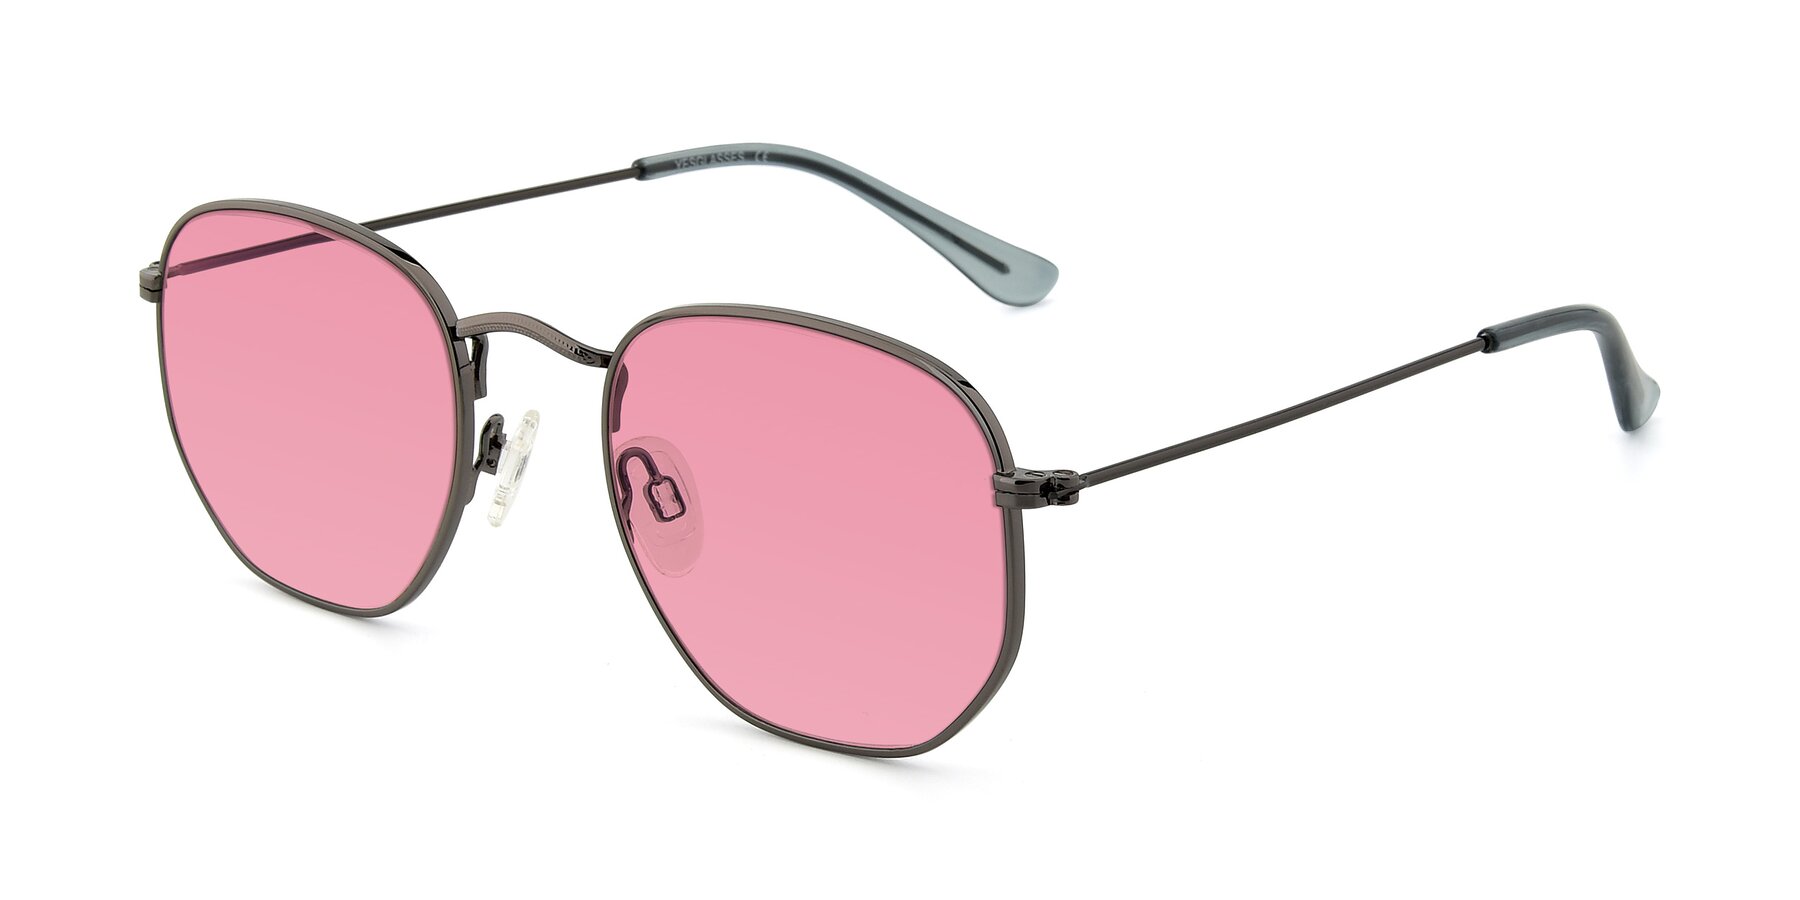 Angle of SSR1944 in Grey with Pink Tinted Lenses